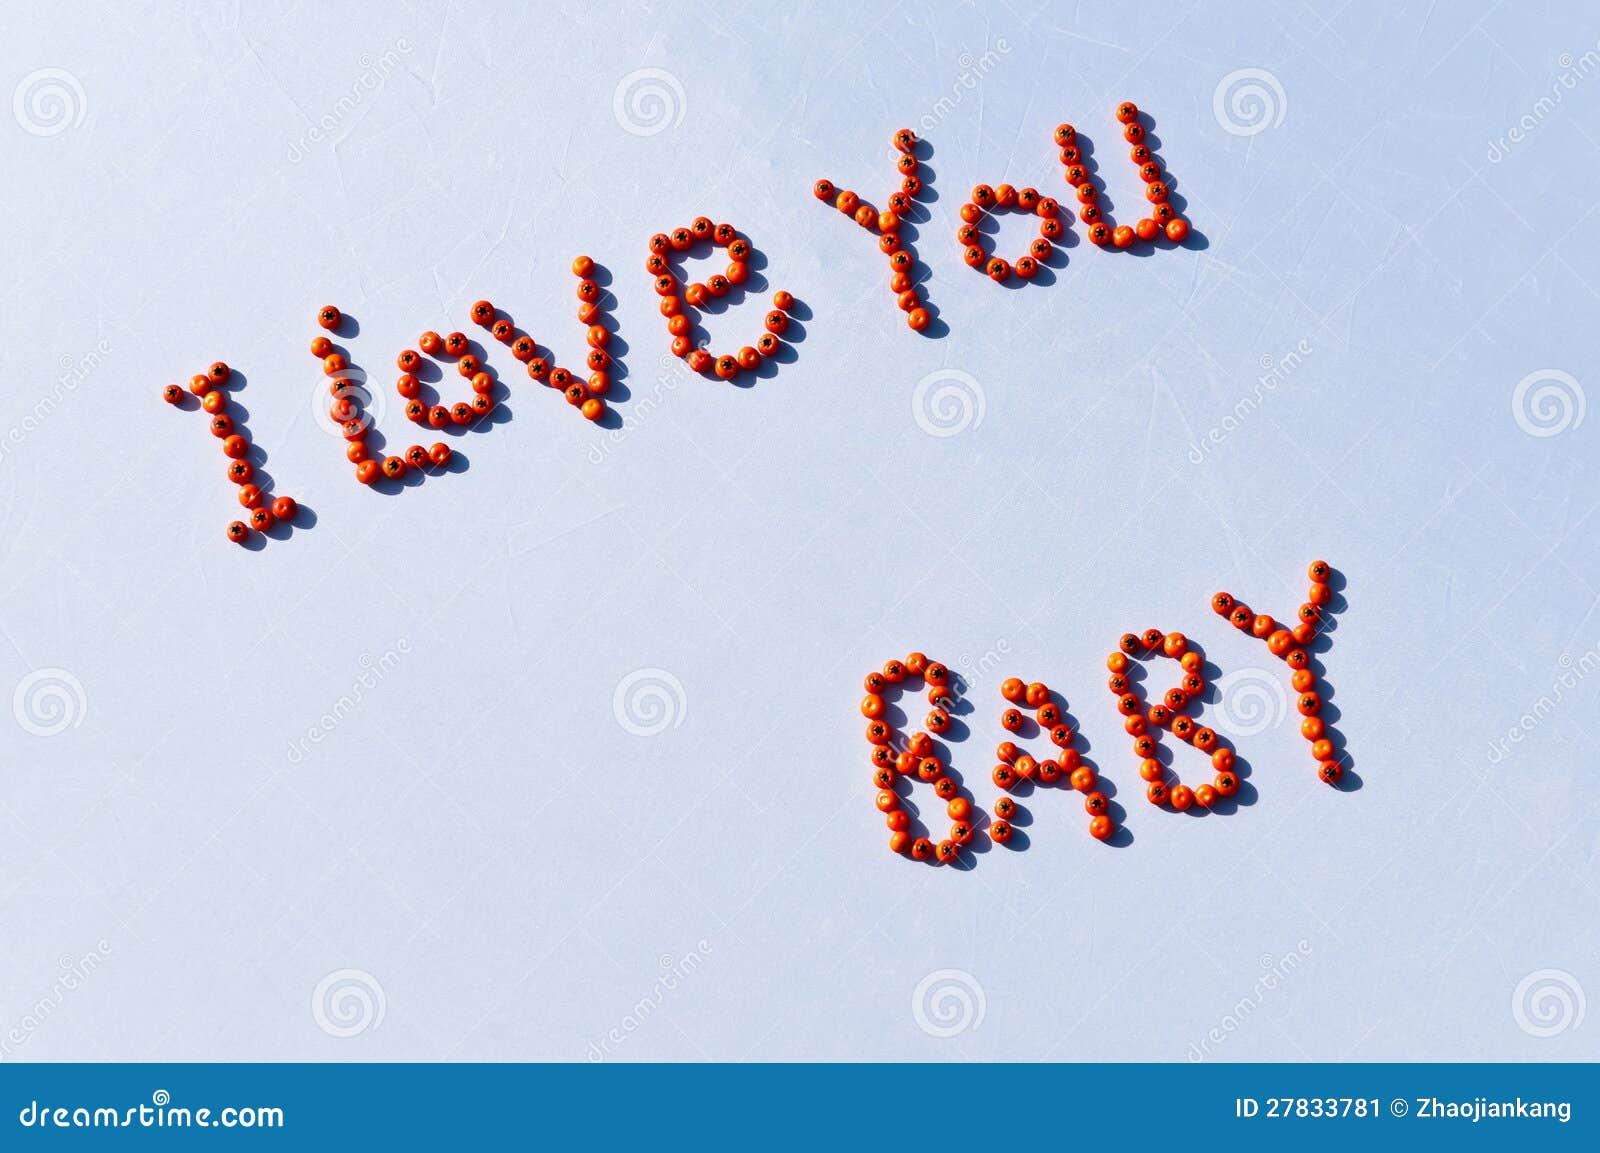 I love you baby stock image. Image of romantic, seed - 27833781